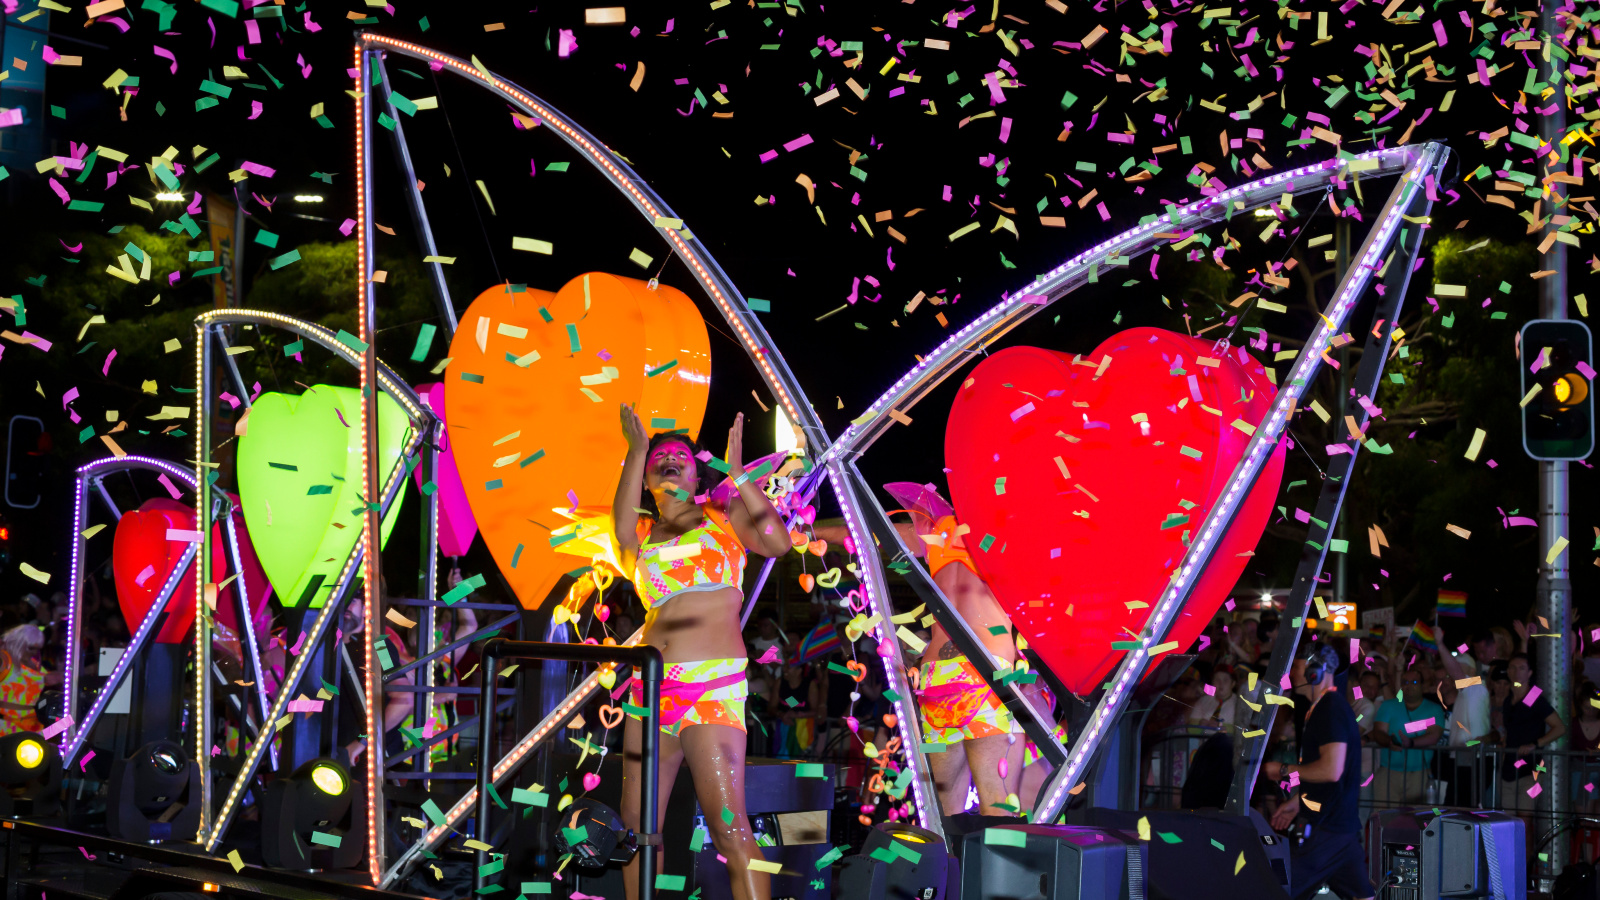 The Sydney Opera house float with heart shaped objects and lit-up strip lights.